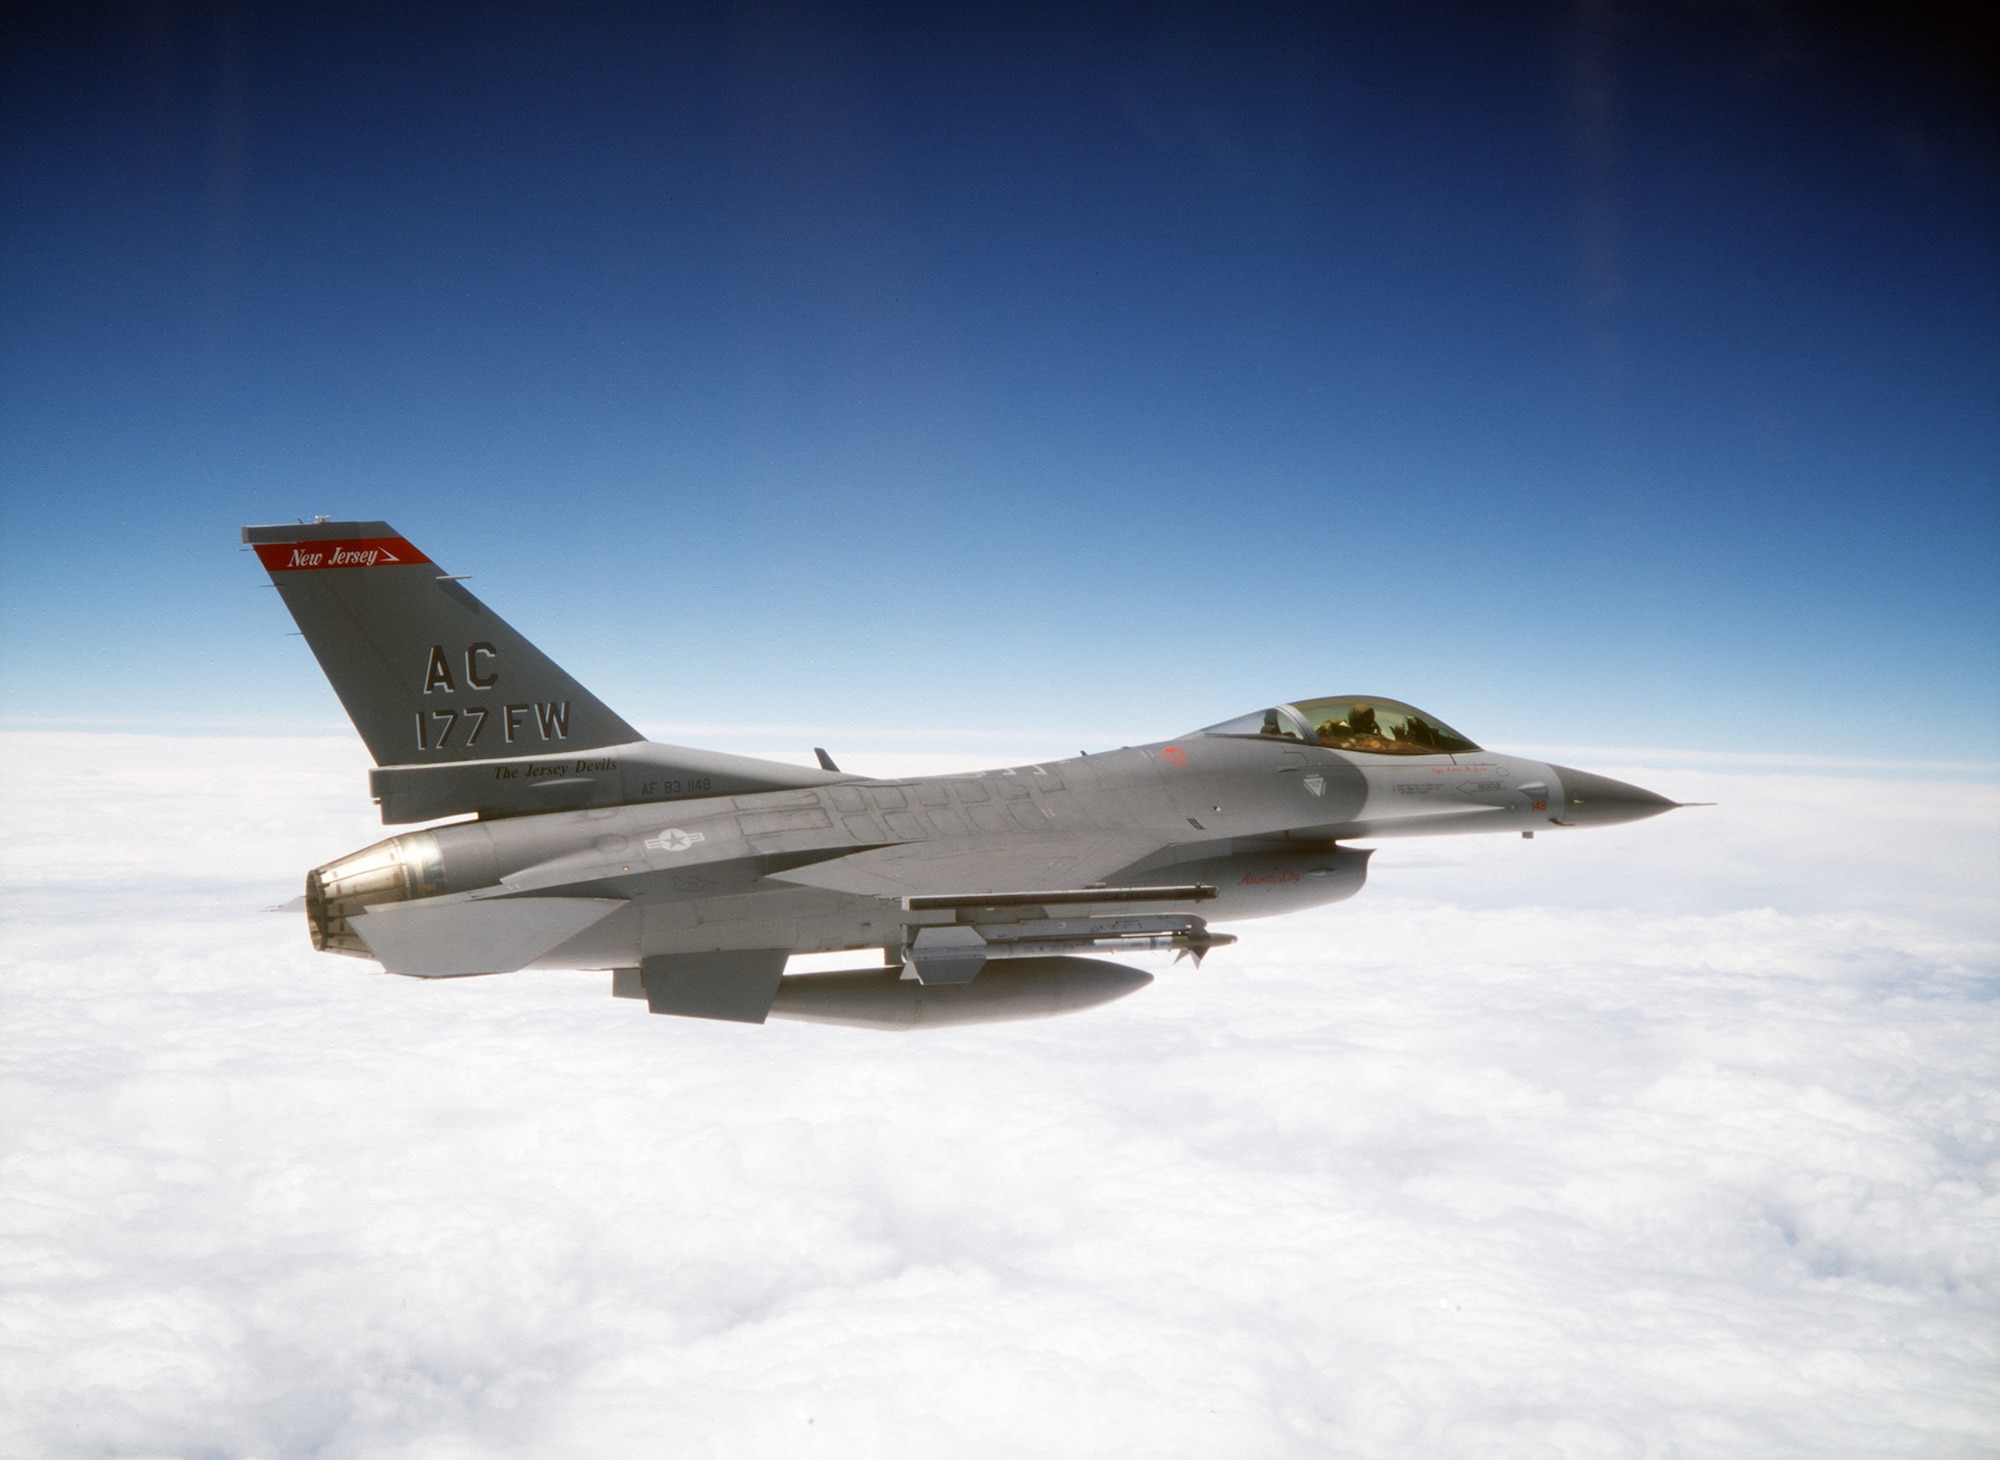 TYNDALL AIR FORCE BASE, Fla. -- Lt. Col. Mike Cosby, 177th Fighter Wing commander, flies an F-16C block 25 aircraft from here to Atlantic City International Airport, N.J.  The wing participated in Combat Archer training at Tyndall. (U.S. Air Force photo by Master Sgt. Don Taggart)